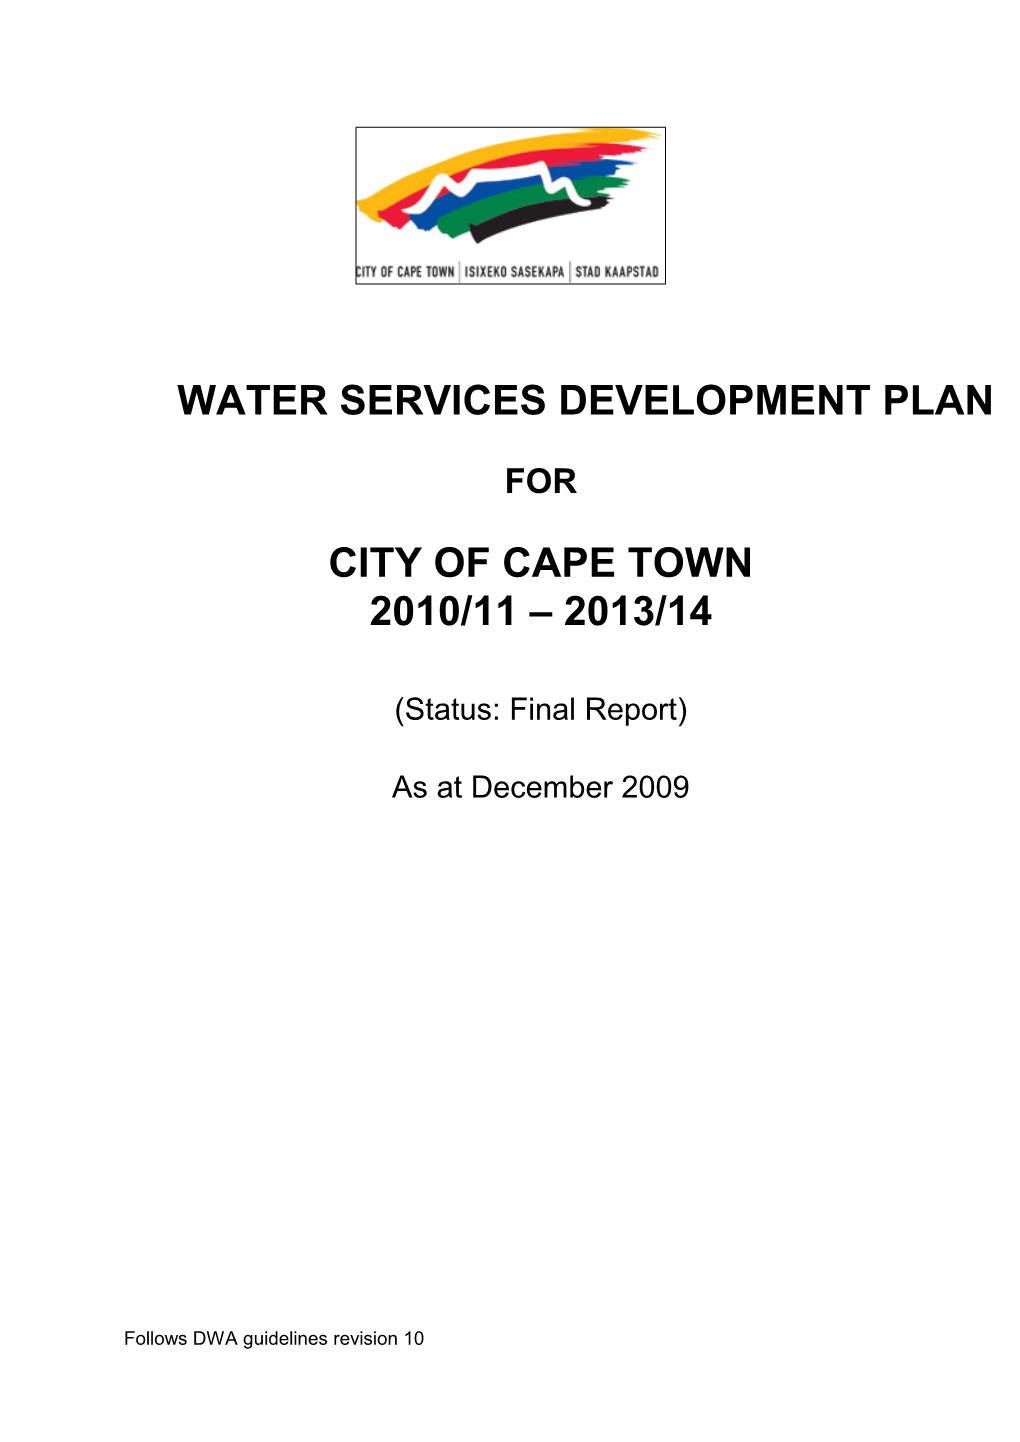 Water Services Development Plan for City of Cape Town.Pdf